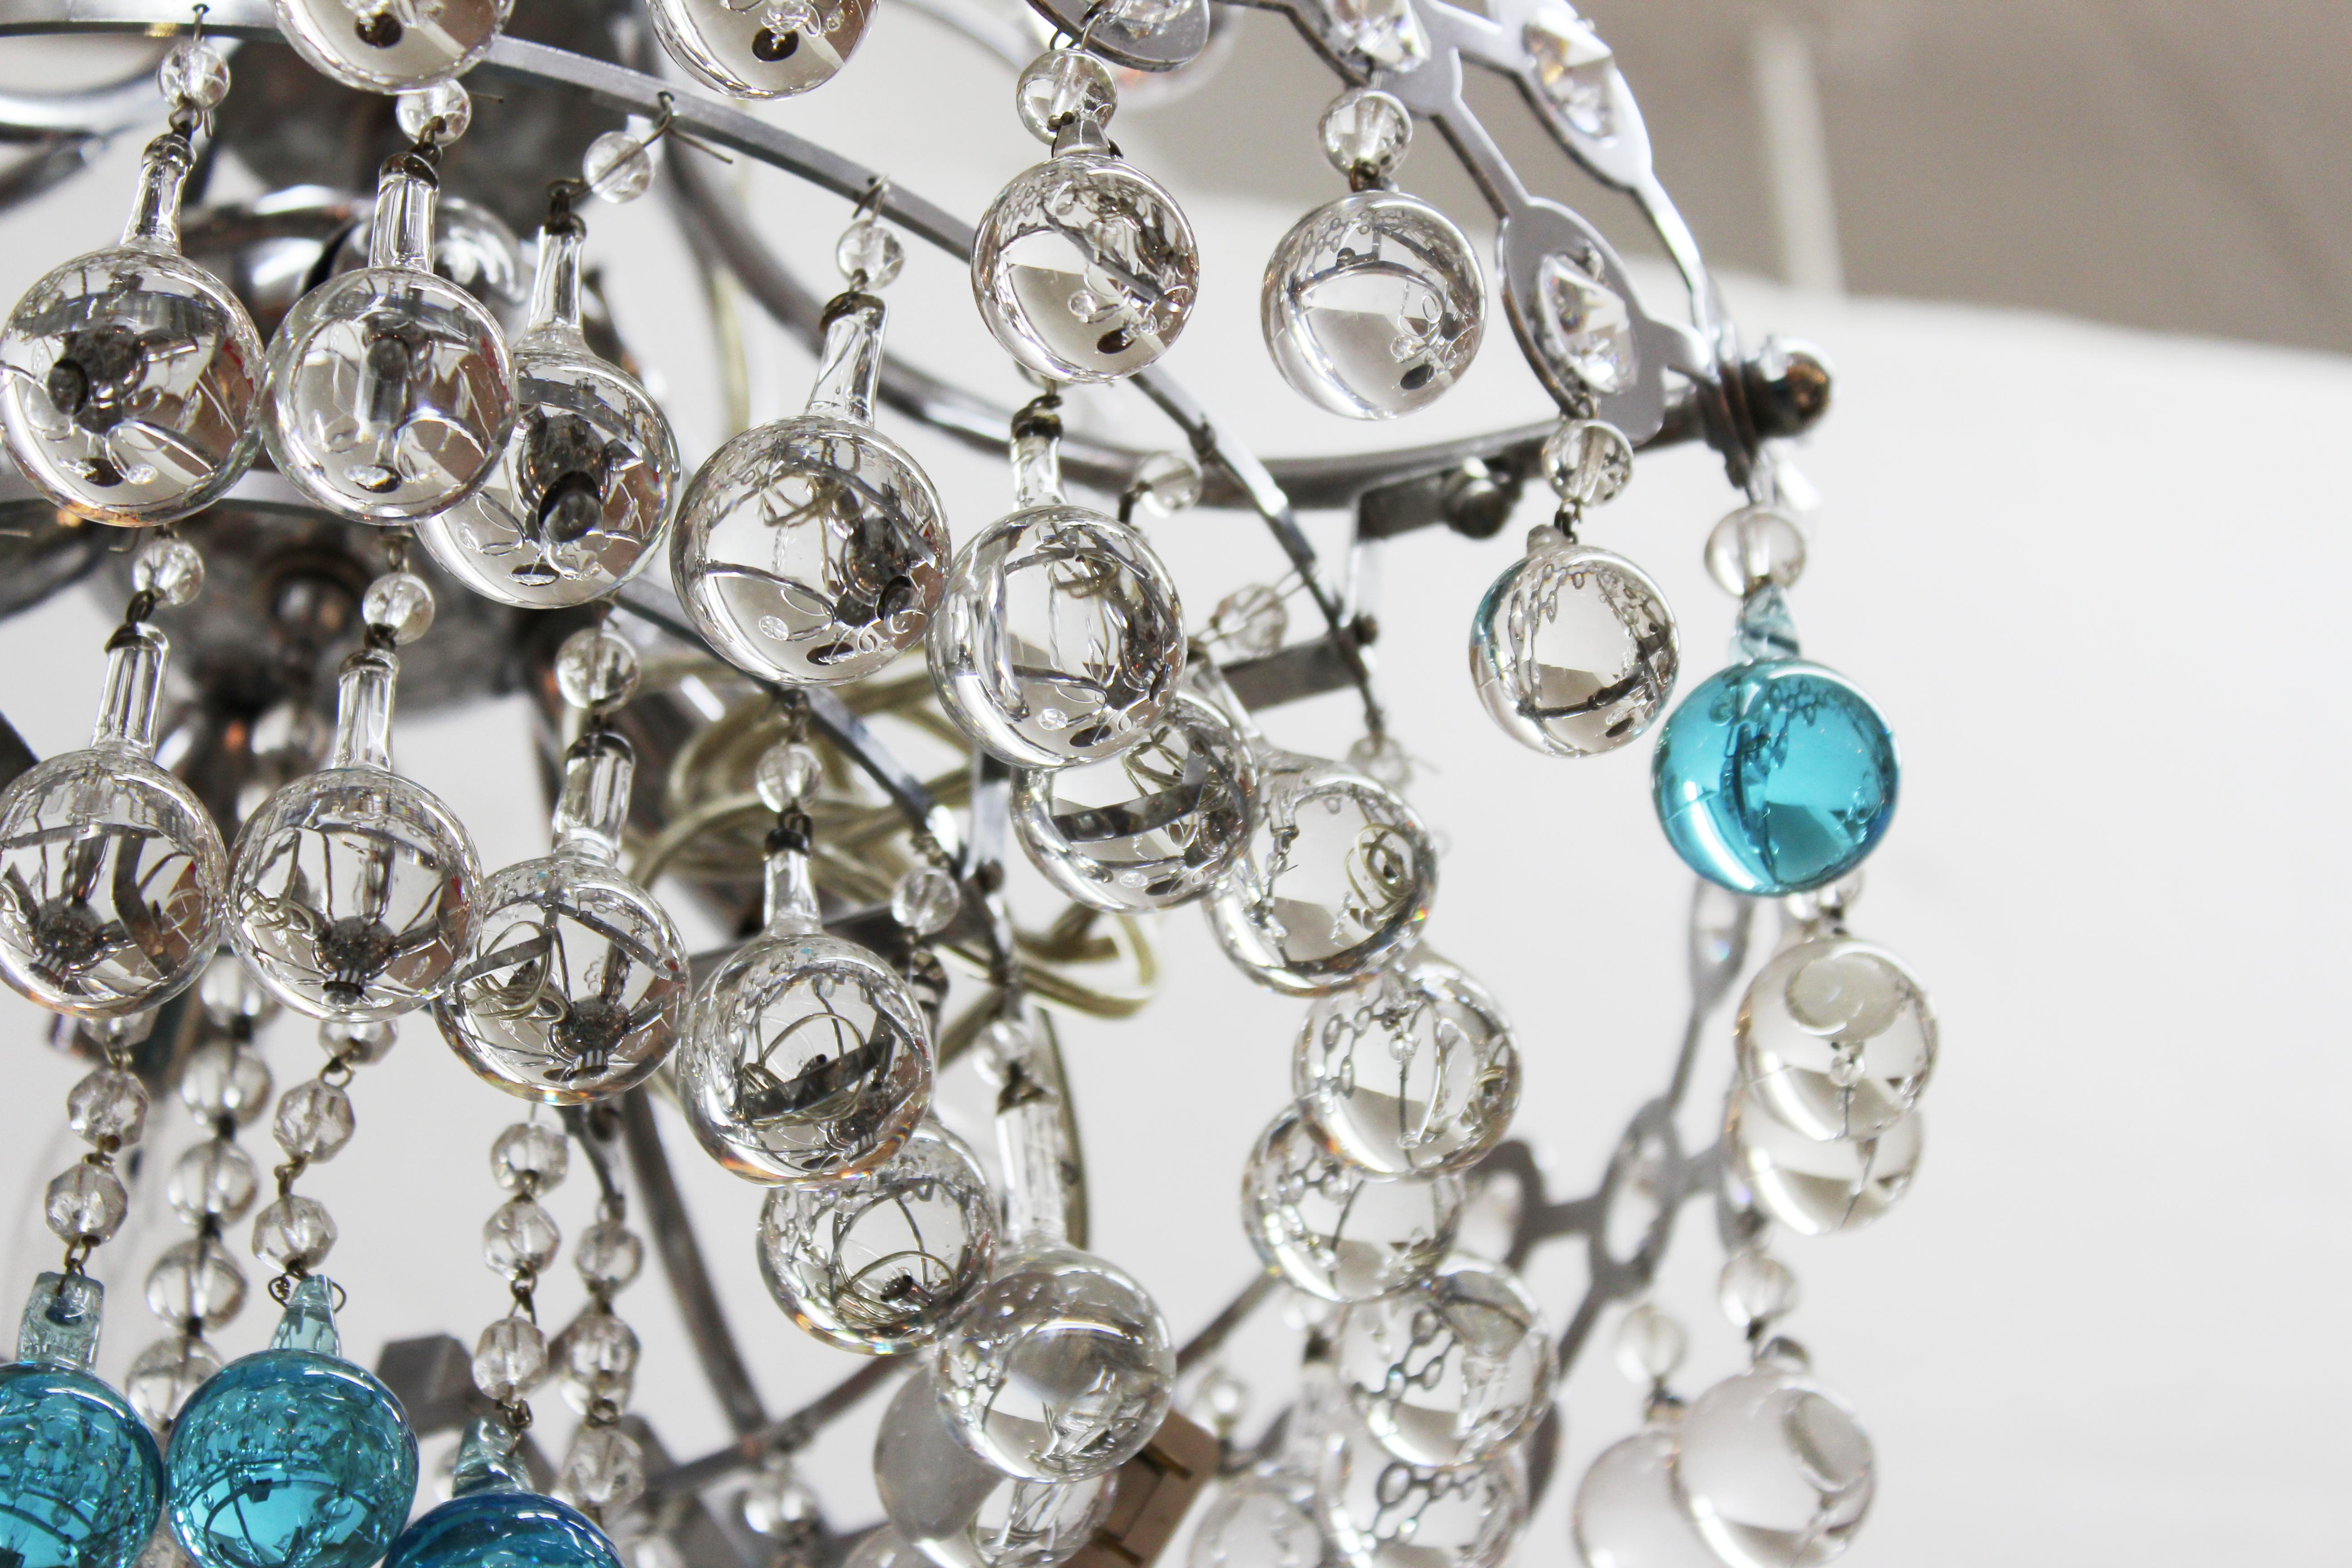 Mid-20th Century Italian Mid-Century Modern Chrome Chandelier with Clear & Turquoise Glass Balls